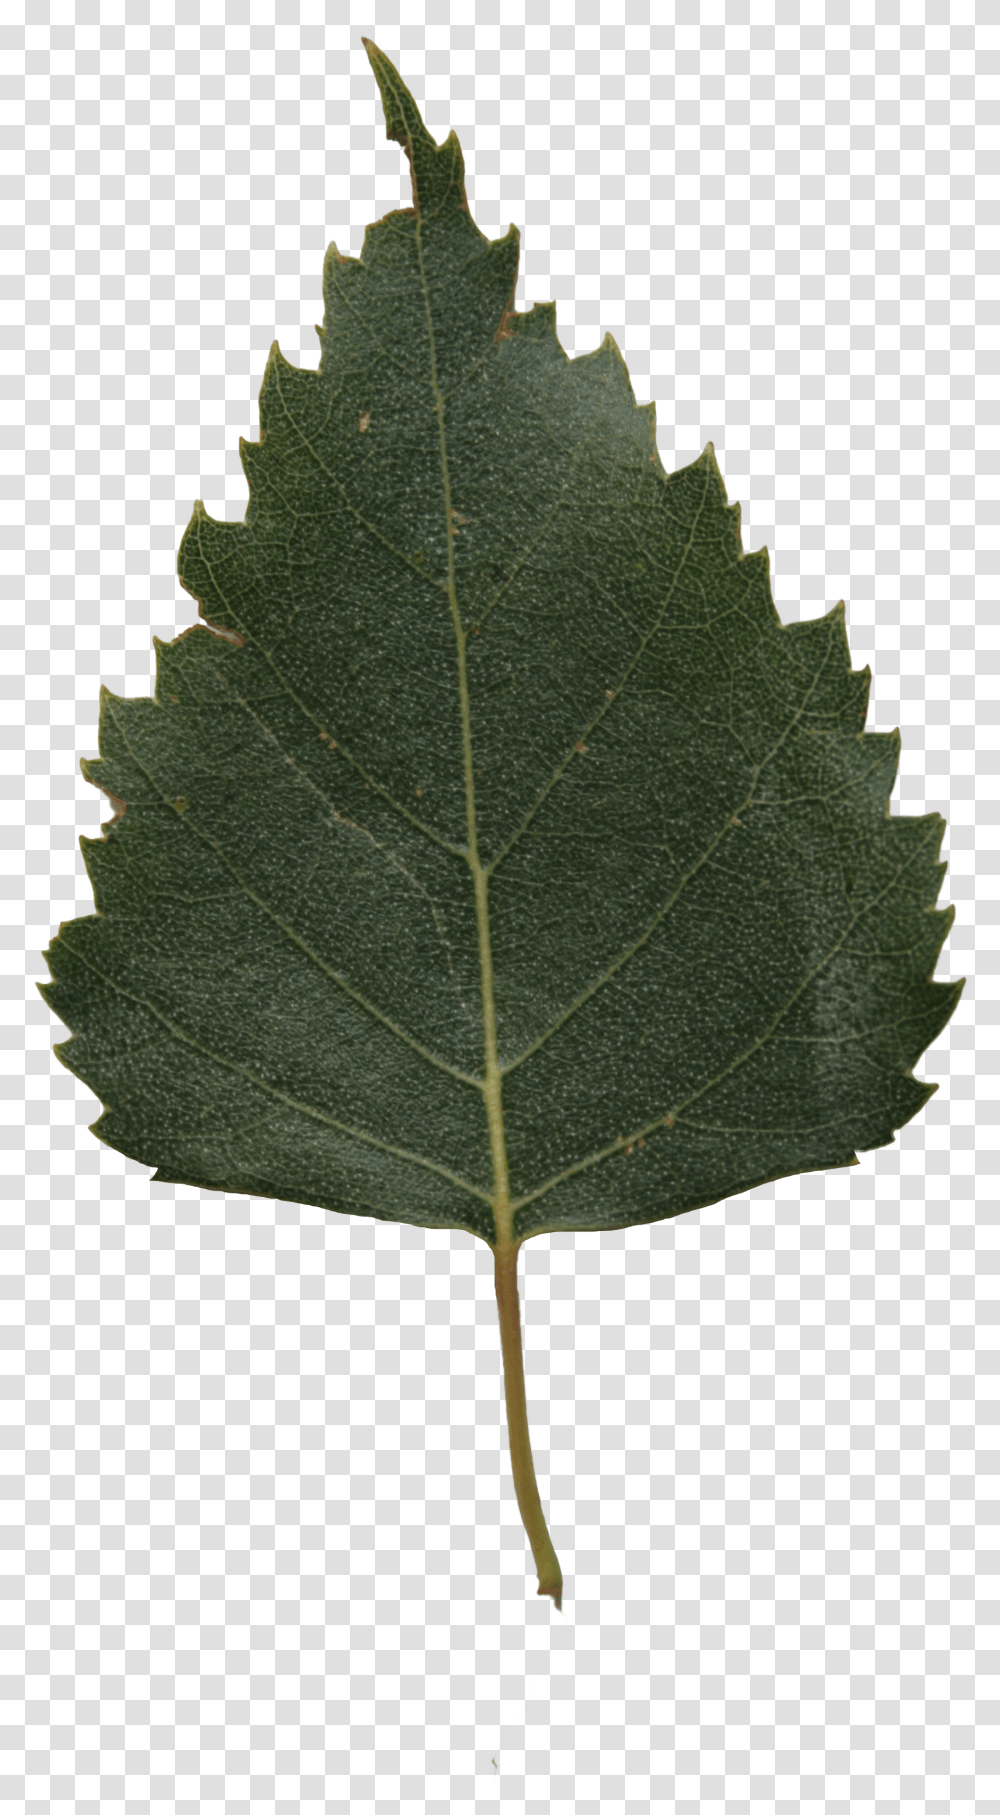 Birch Texture Free Cut Out People Trees And Leaves Birch Leaf Transparent Png